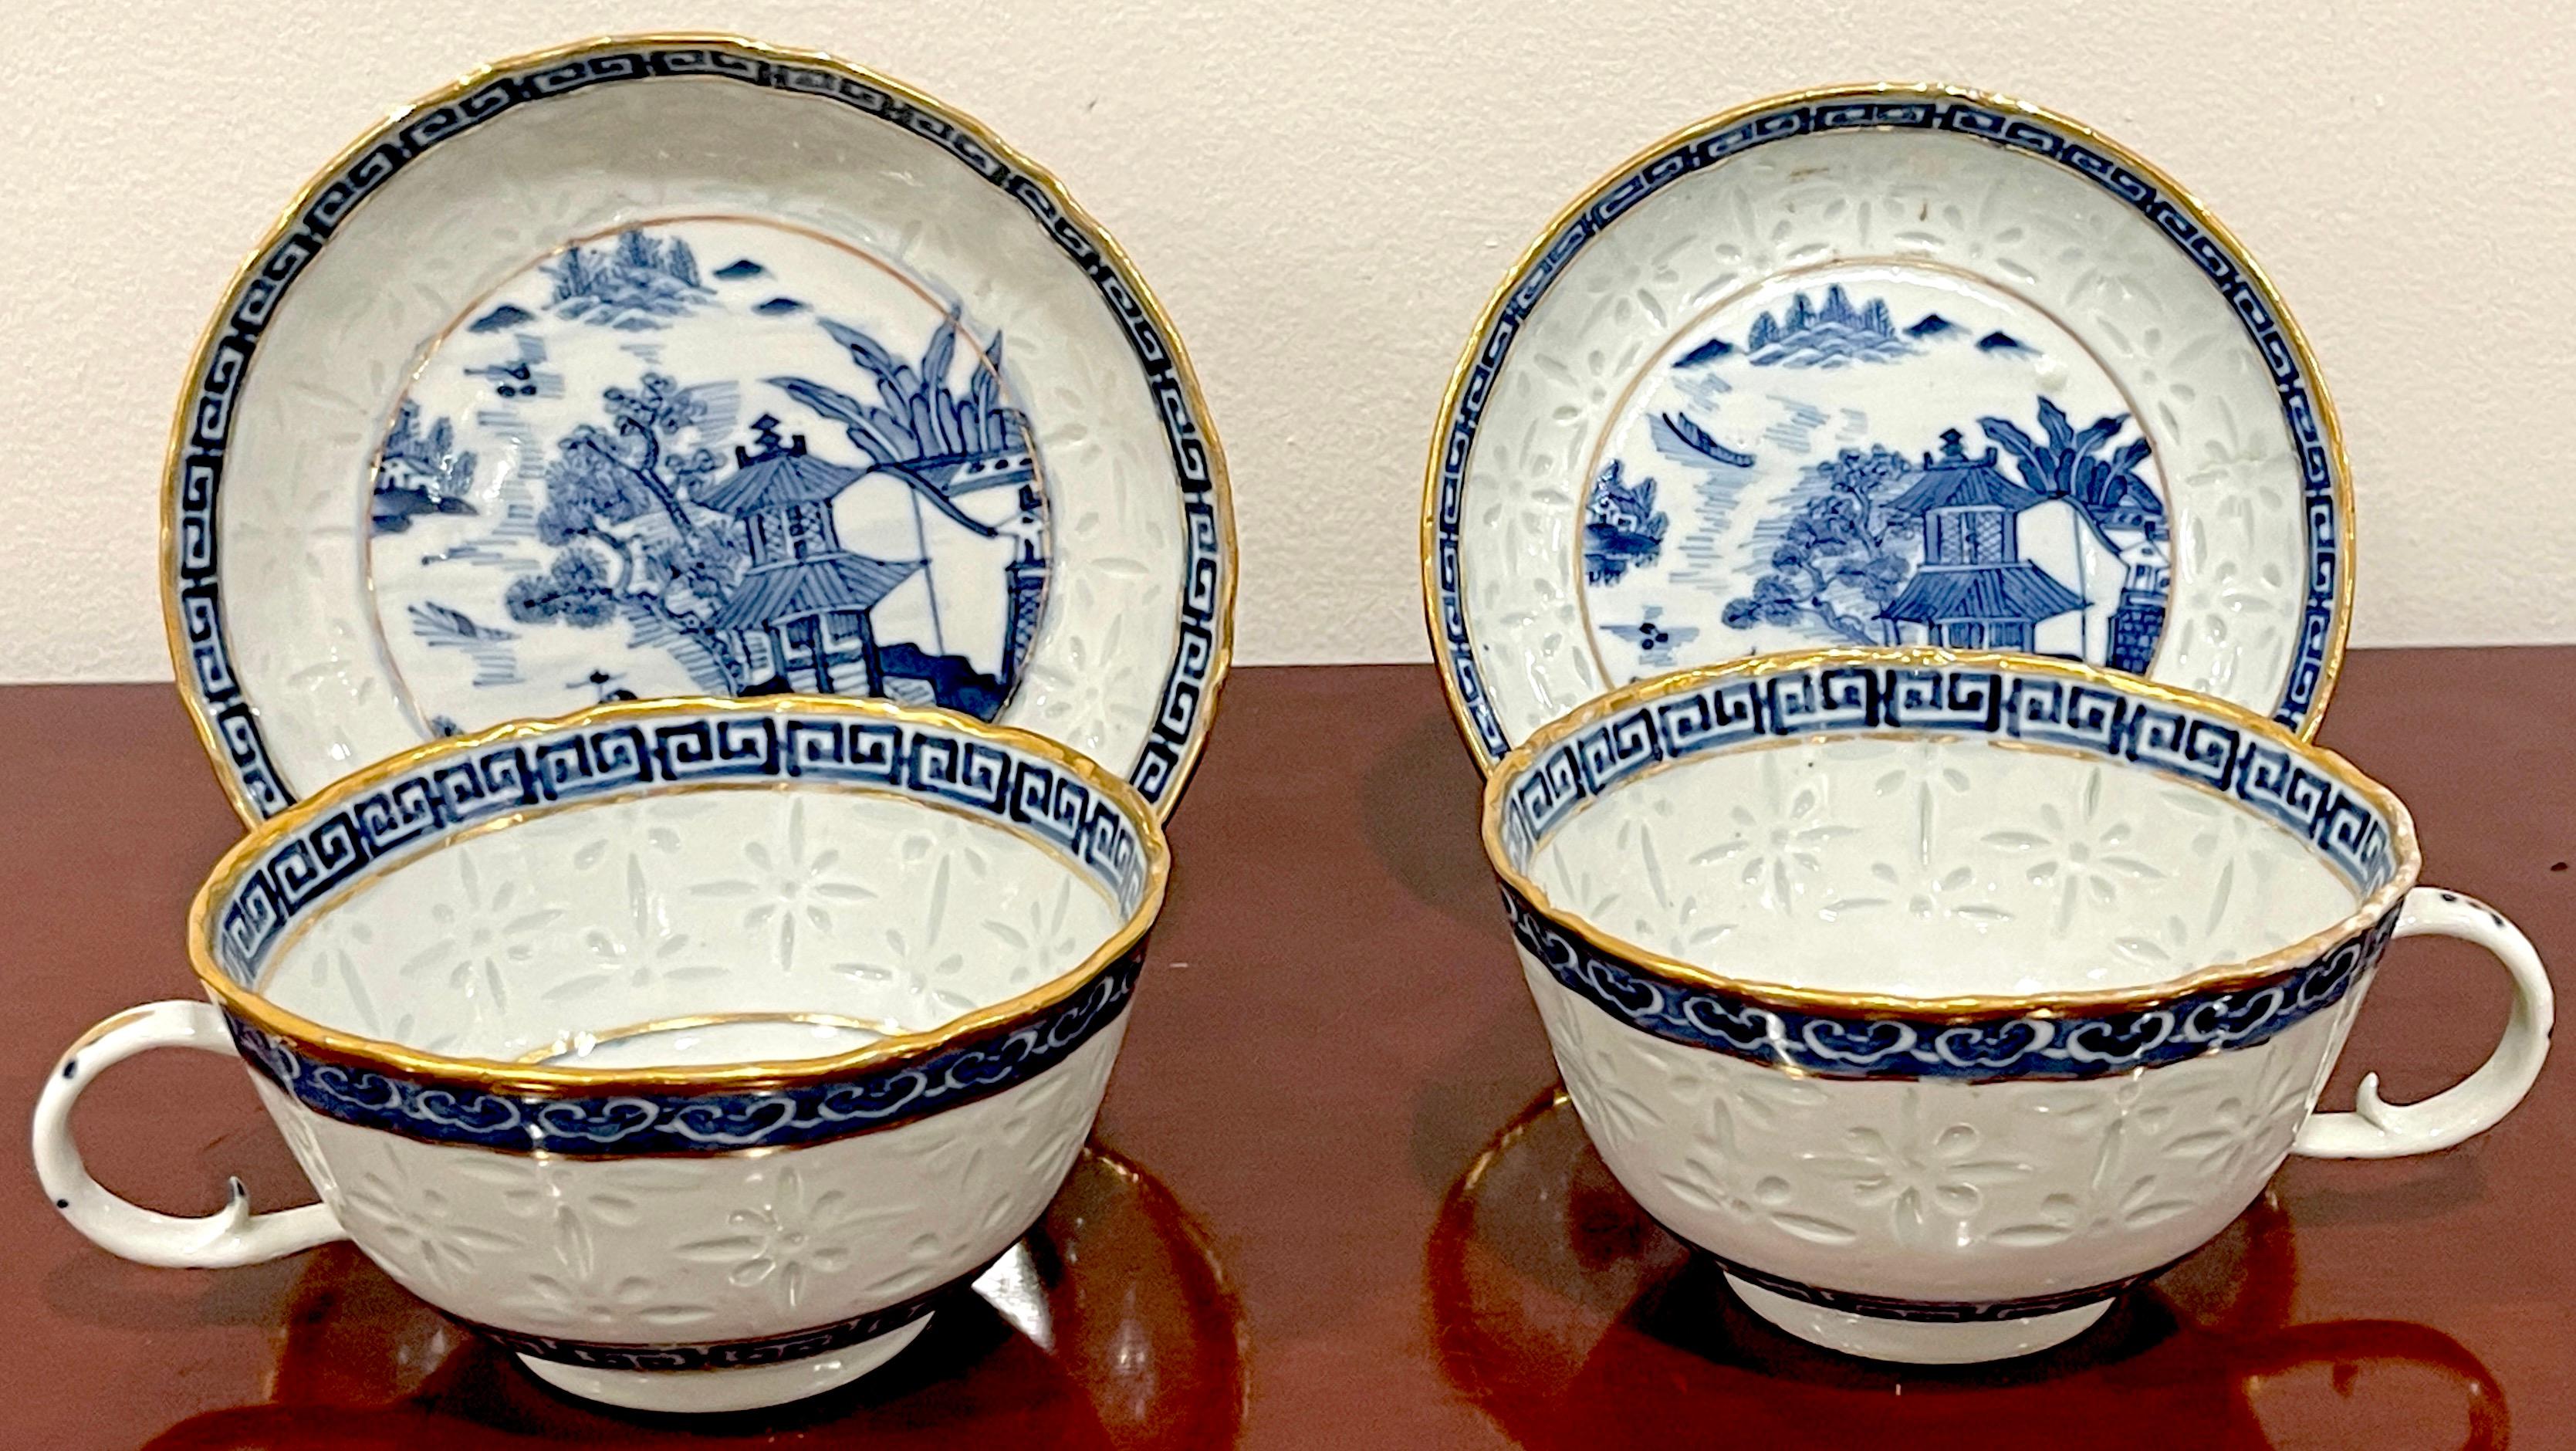 Rare Pair of Blue & White Nanking 'Rice Grain' Cups & Saucers, Qianlong Marked 
China, 19th Century or Older, Possibly a Special Order

A truly rare and exquisite pair of Blue & White Nanking pattern 'Rice Grain' Cups & Saucers, dating back to the